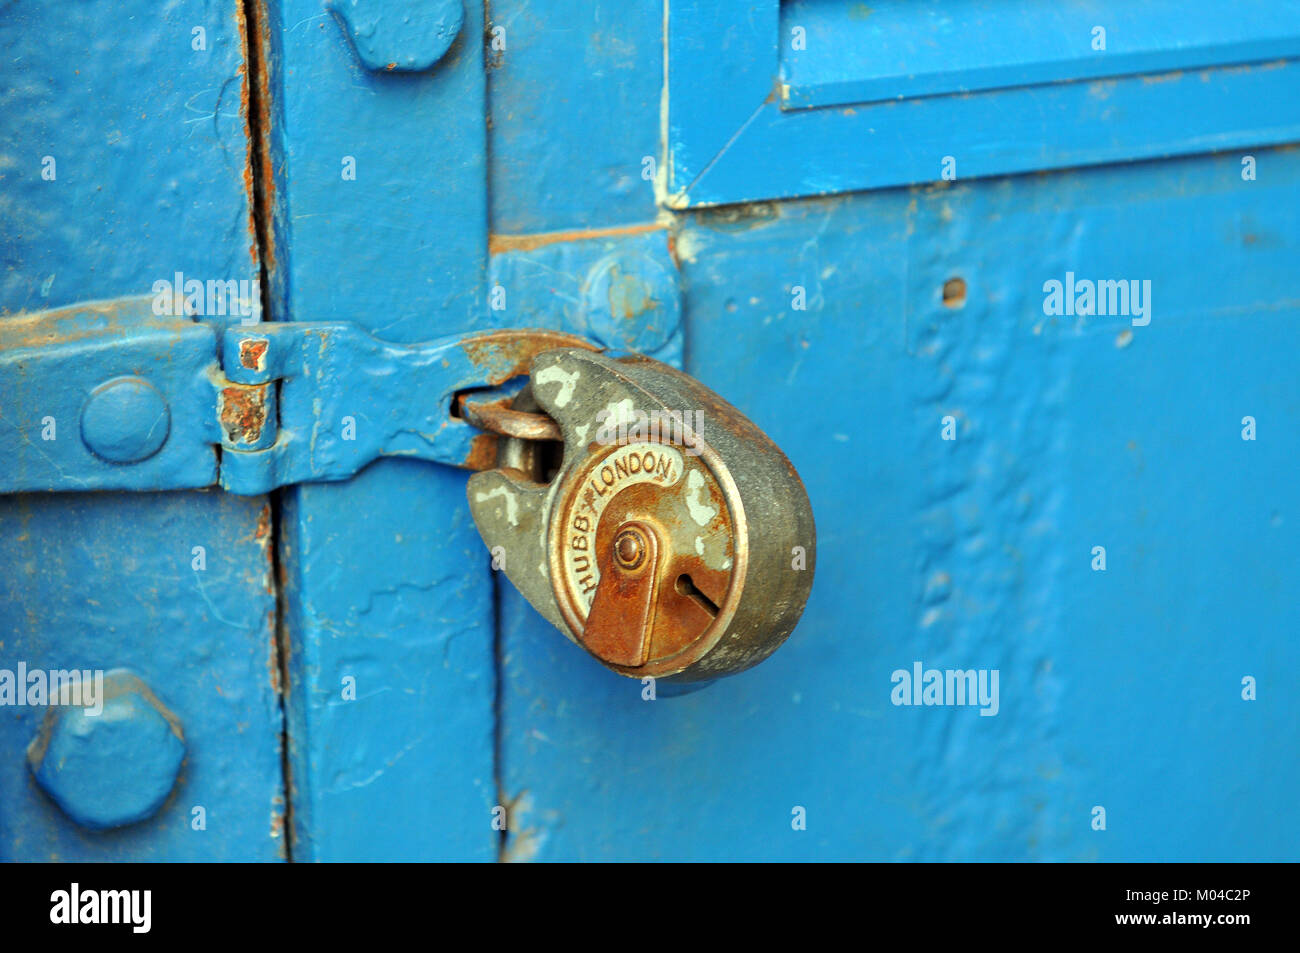 an old rusty padlock on a blue painted door with and iron or steel hasp and staple or locking closing mechanism. old flaking and peeling blue painted. Stock Photo